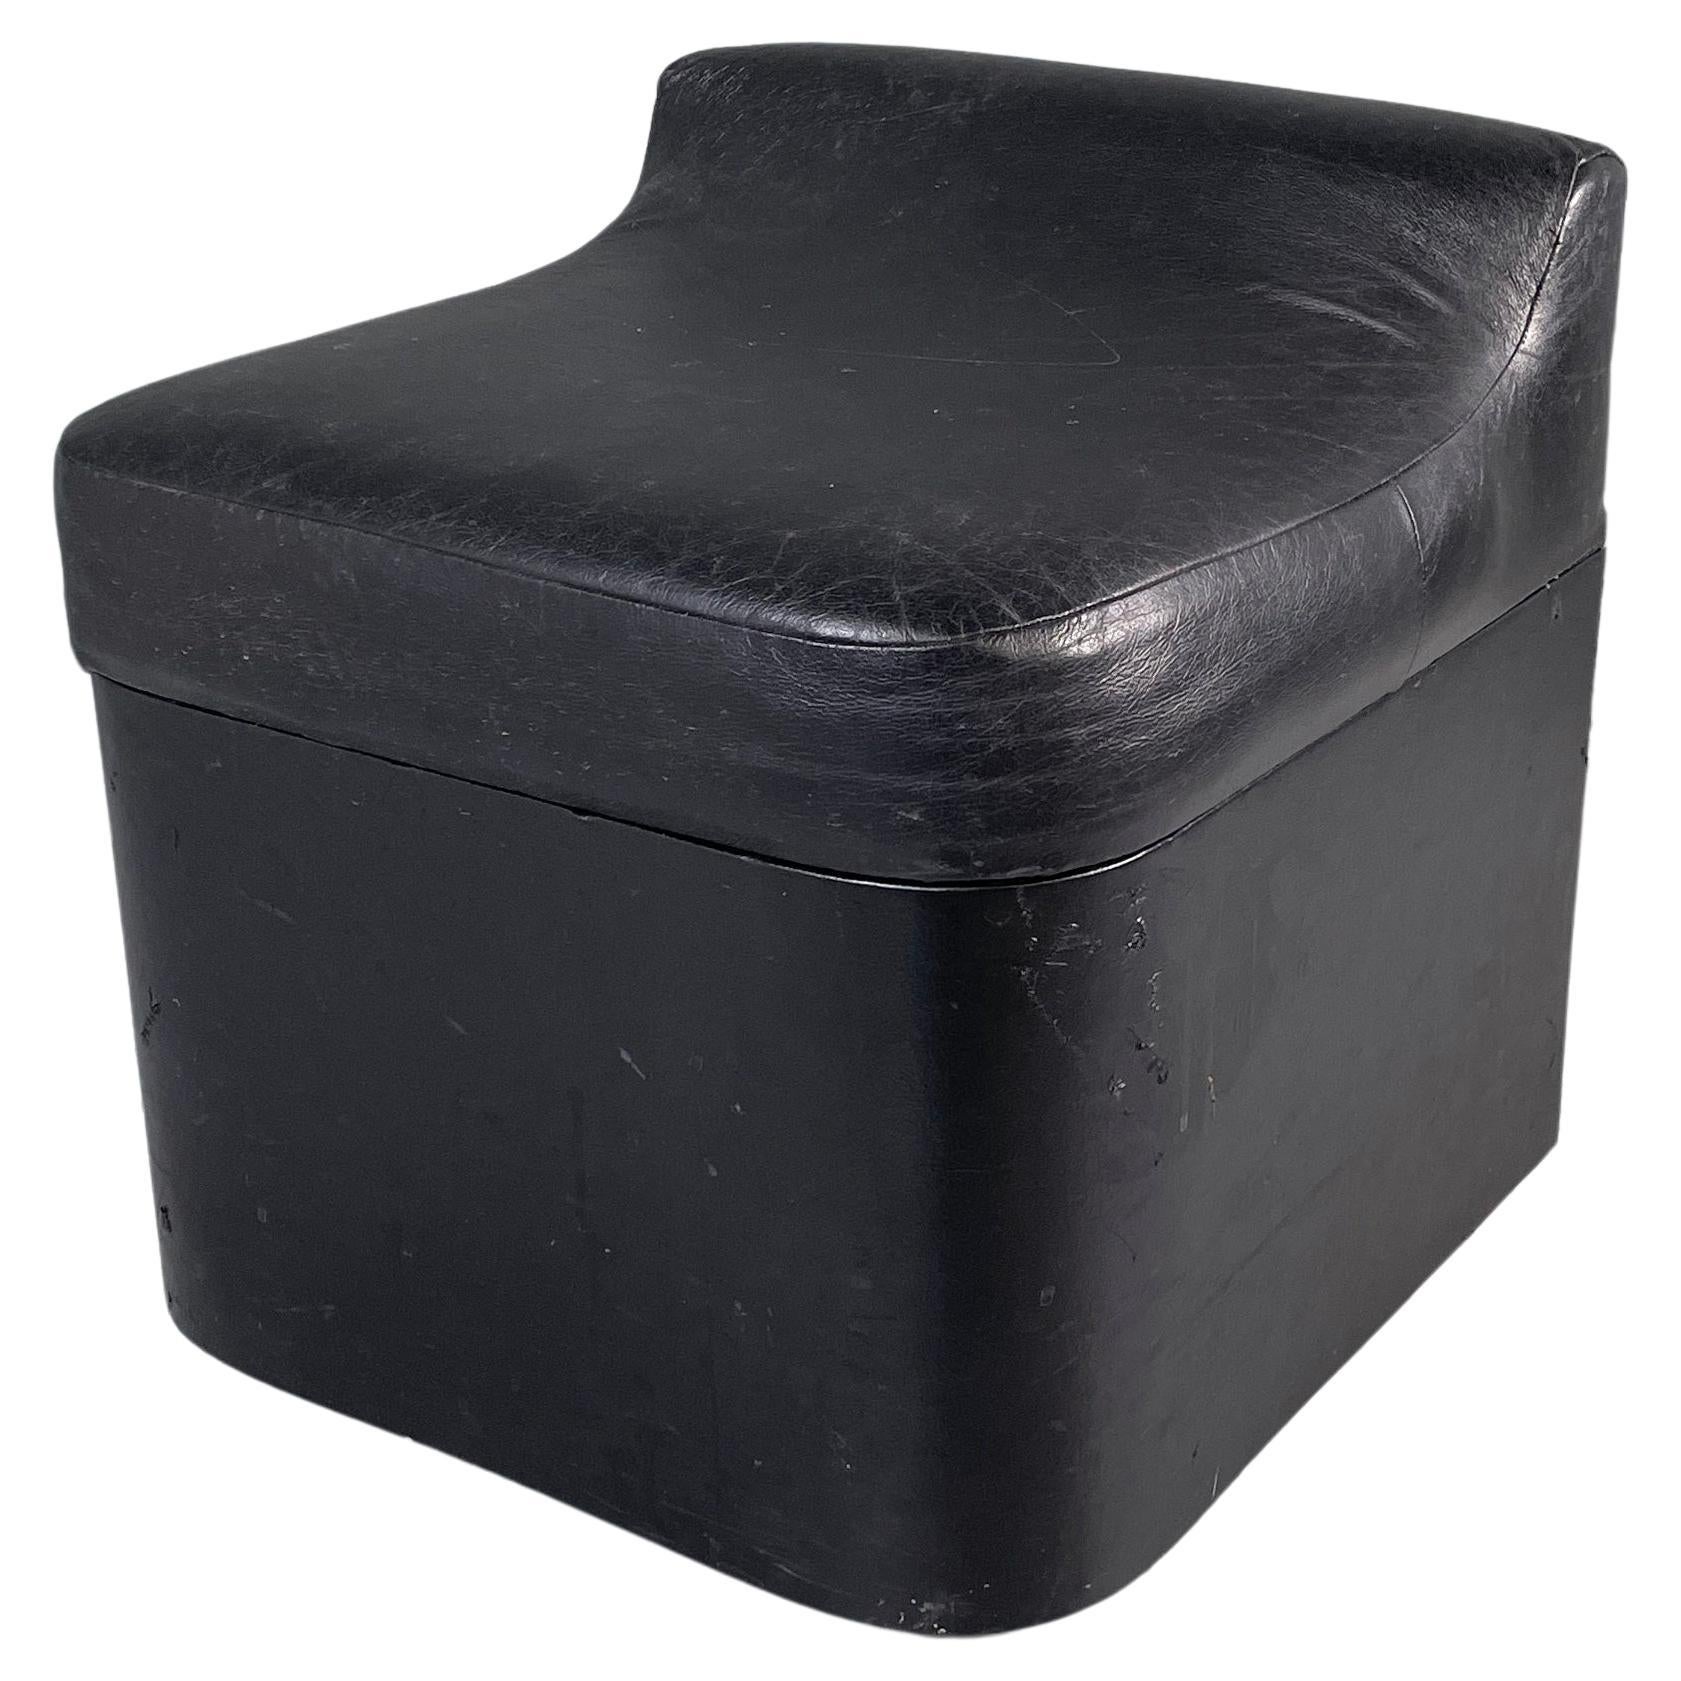 Italian modern Squared stool in black faux leather with wheels, 1980s